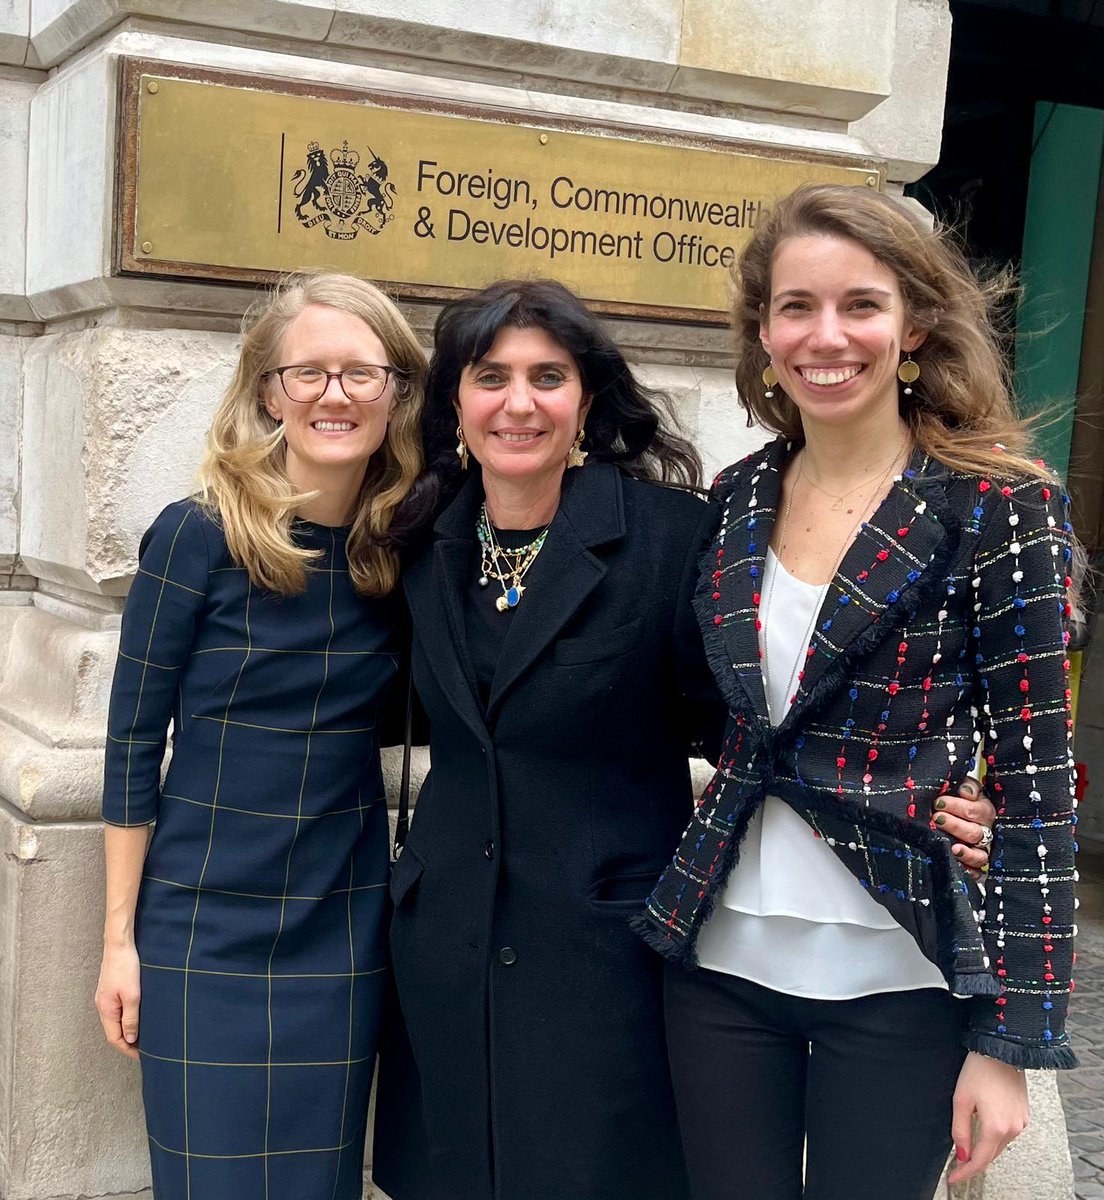 Today @leilasimona, @MatiRosina and I advised a group of employees of the @FCDOGovUK on migration policy and politics. I learned so much from these two scholars and it was amazing to take part in an all-women expert panel (a wanel?😅😋)